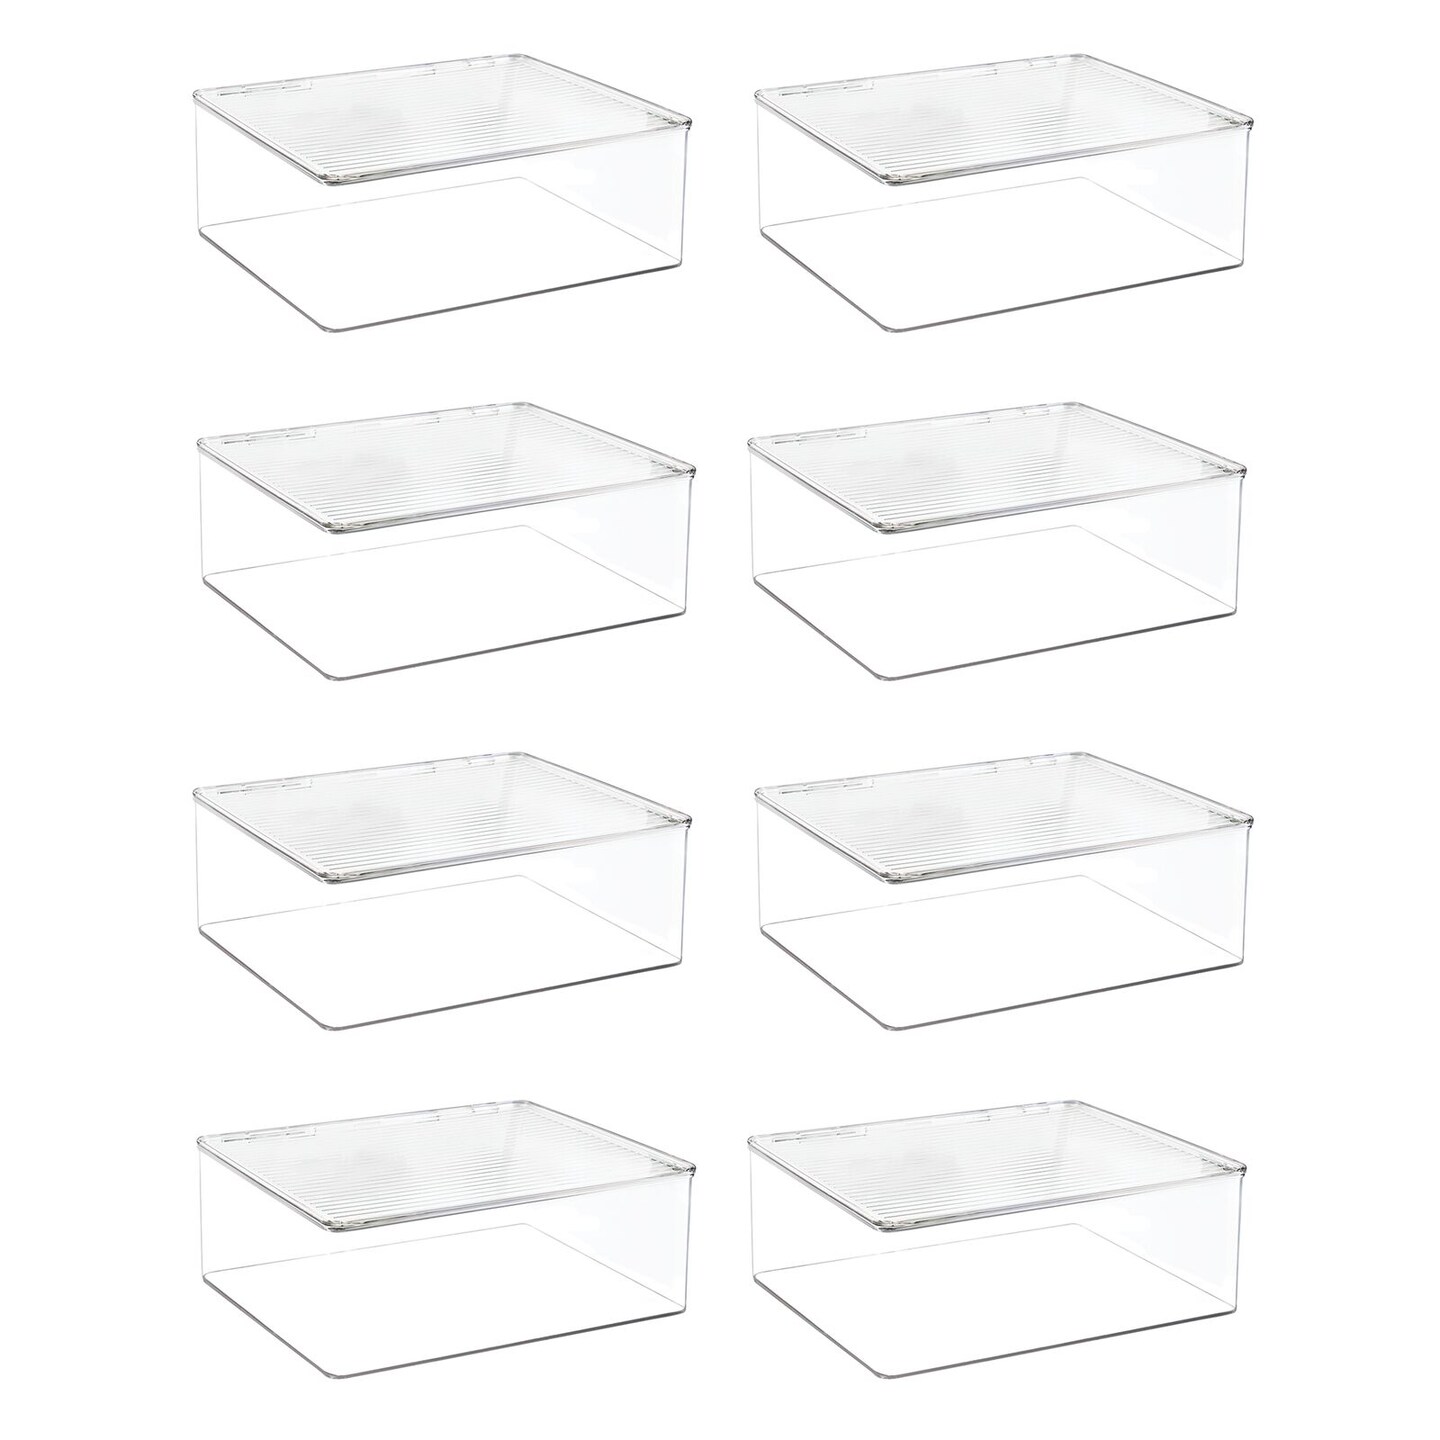 mDesign Plastic Craft Room Stackable Storage Box with Hinge Lid, 8 Pack, Clear